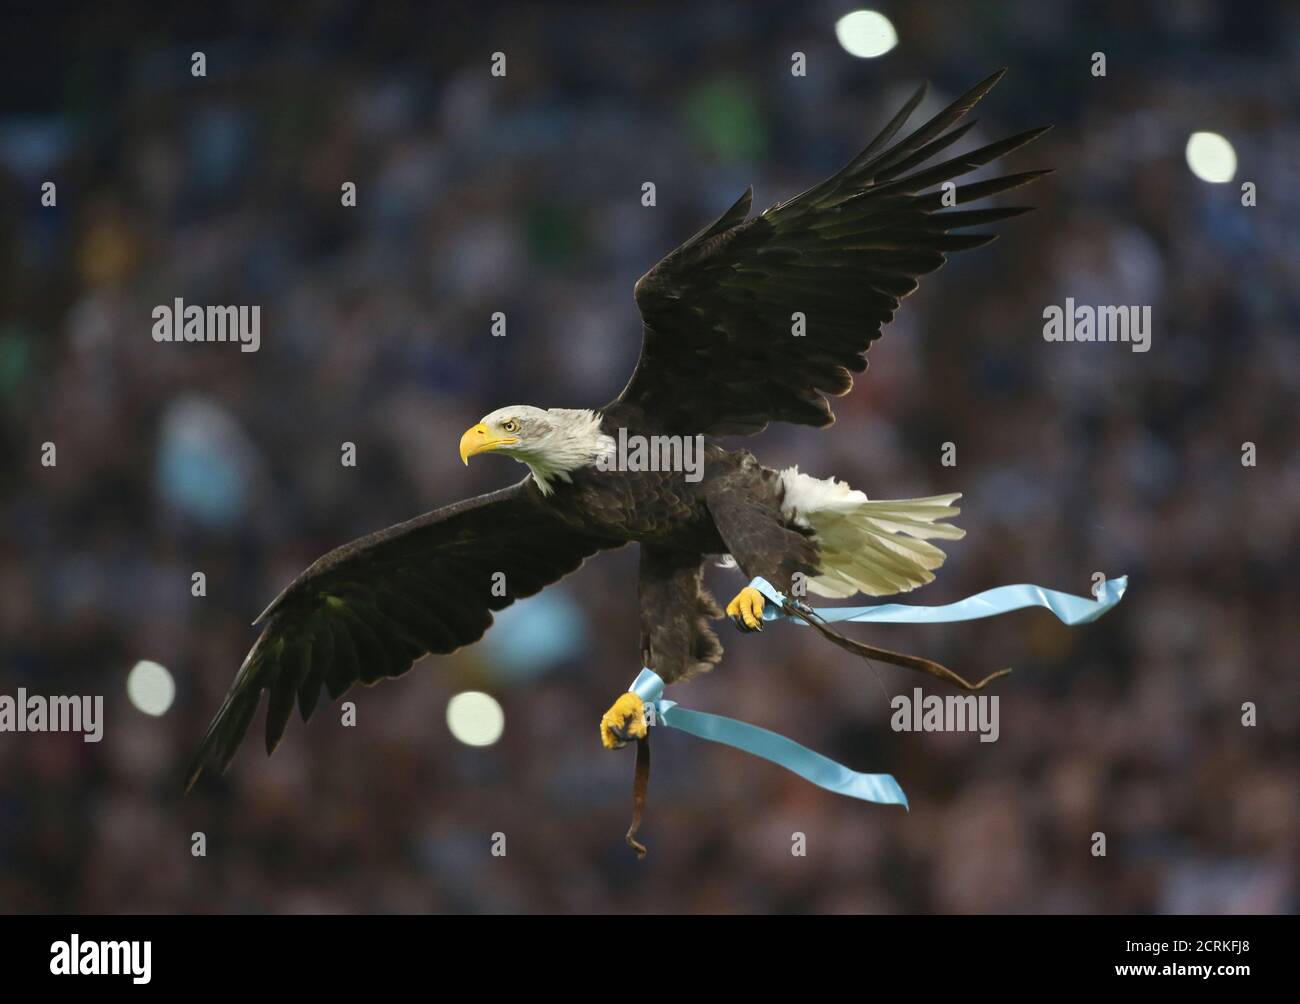 White Headed Eagle High Resolution Stock Photography and Images - Alamy